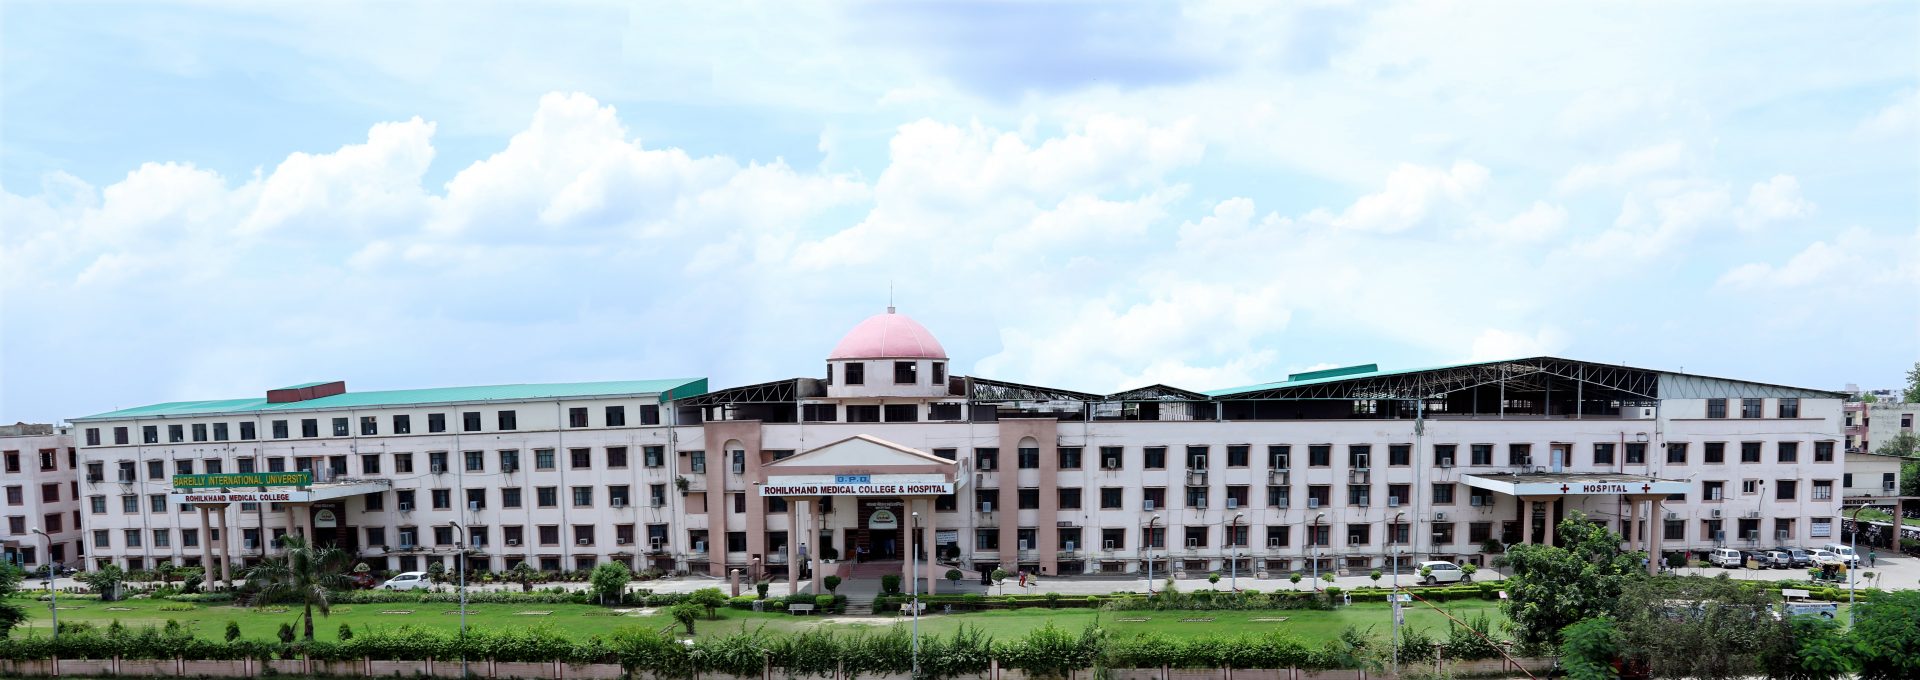 Rohilkhand Medical College Bareilly 2022-23: Admission, Courses Offered, Fees Structure, Cutoff, Counselling , Contact Details